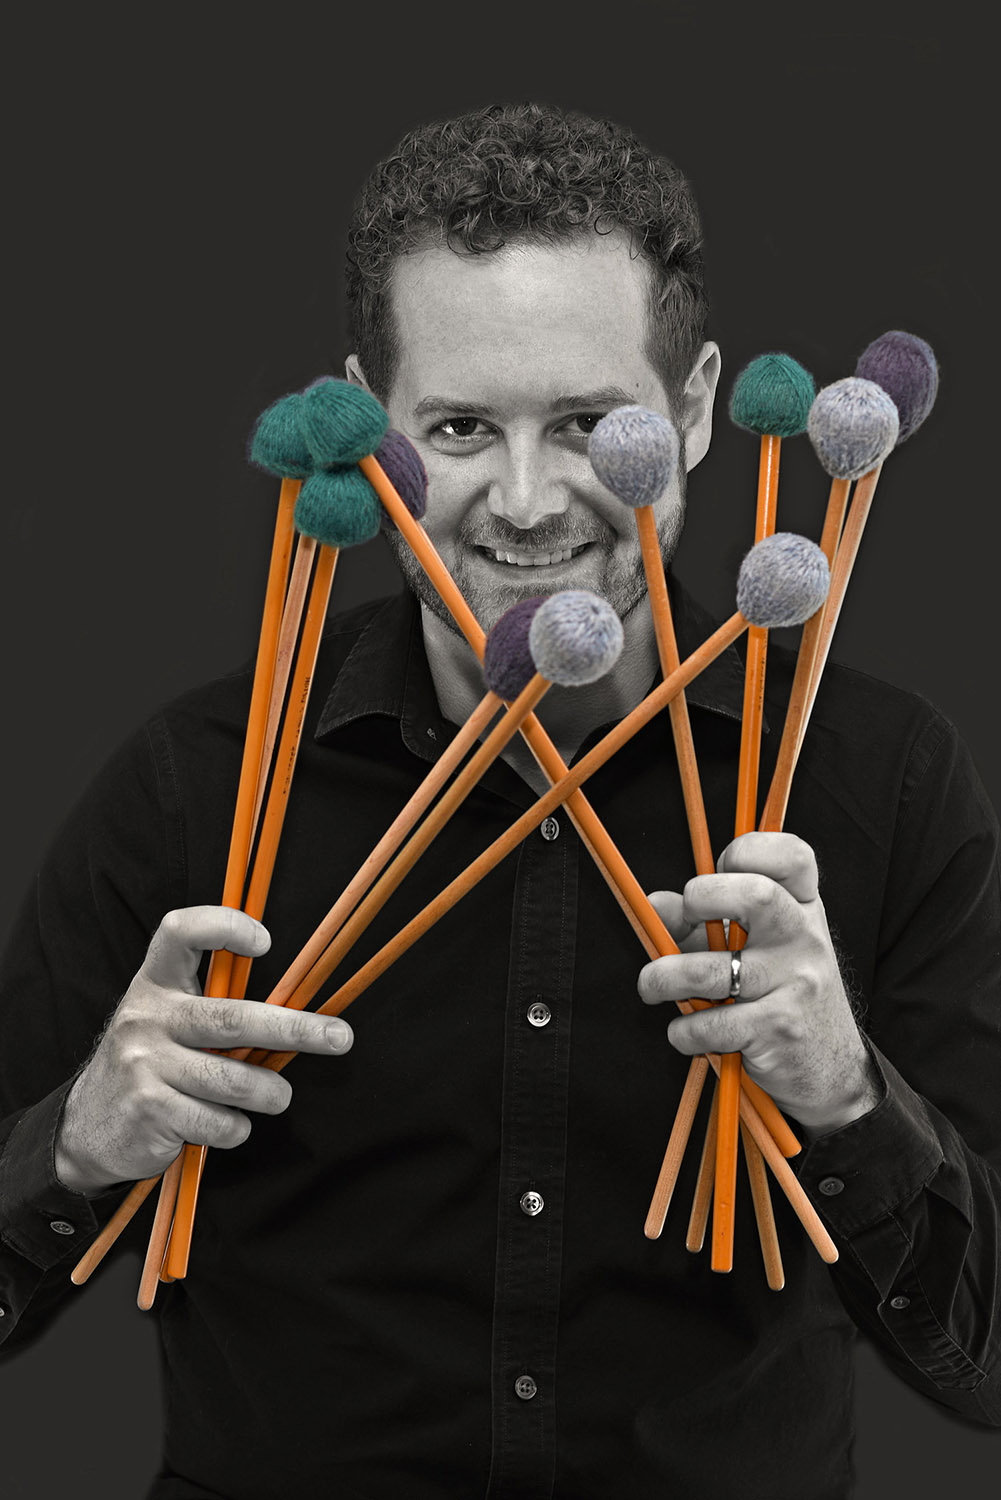 Musician_Xylophone_Mallets_Percussion_Black_and_White_Color_Portrait.jpg